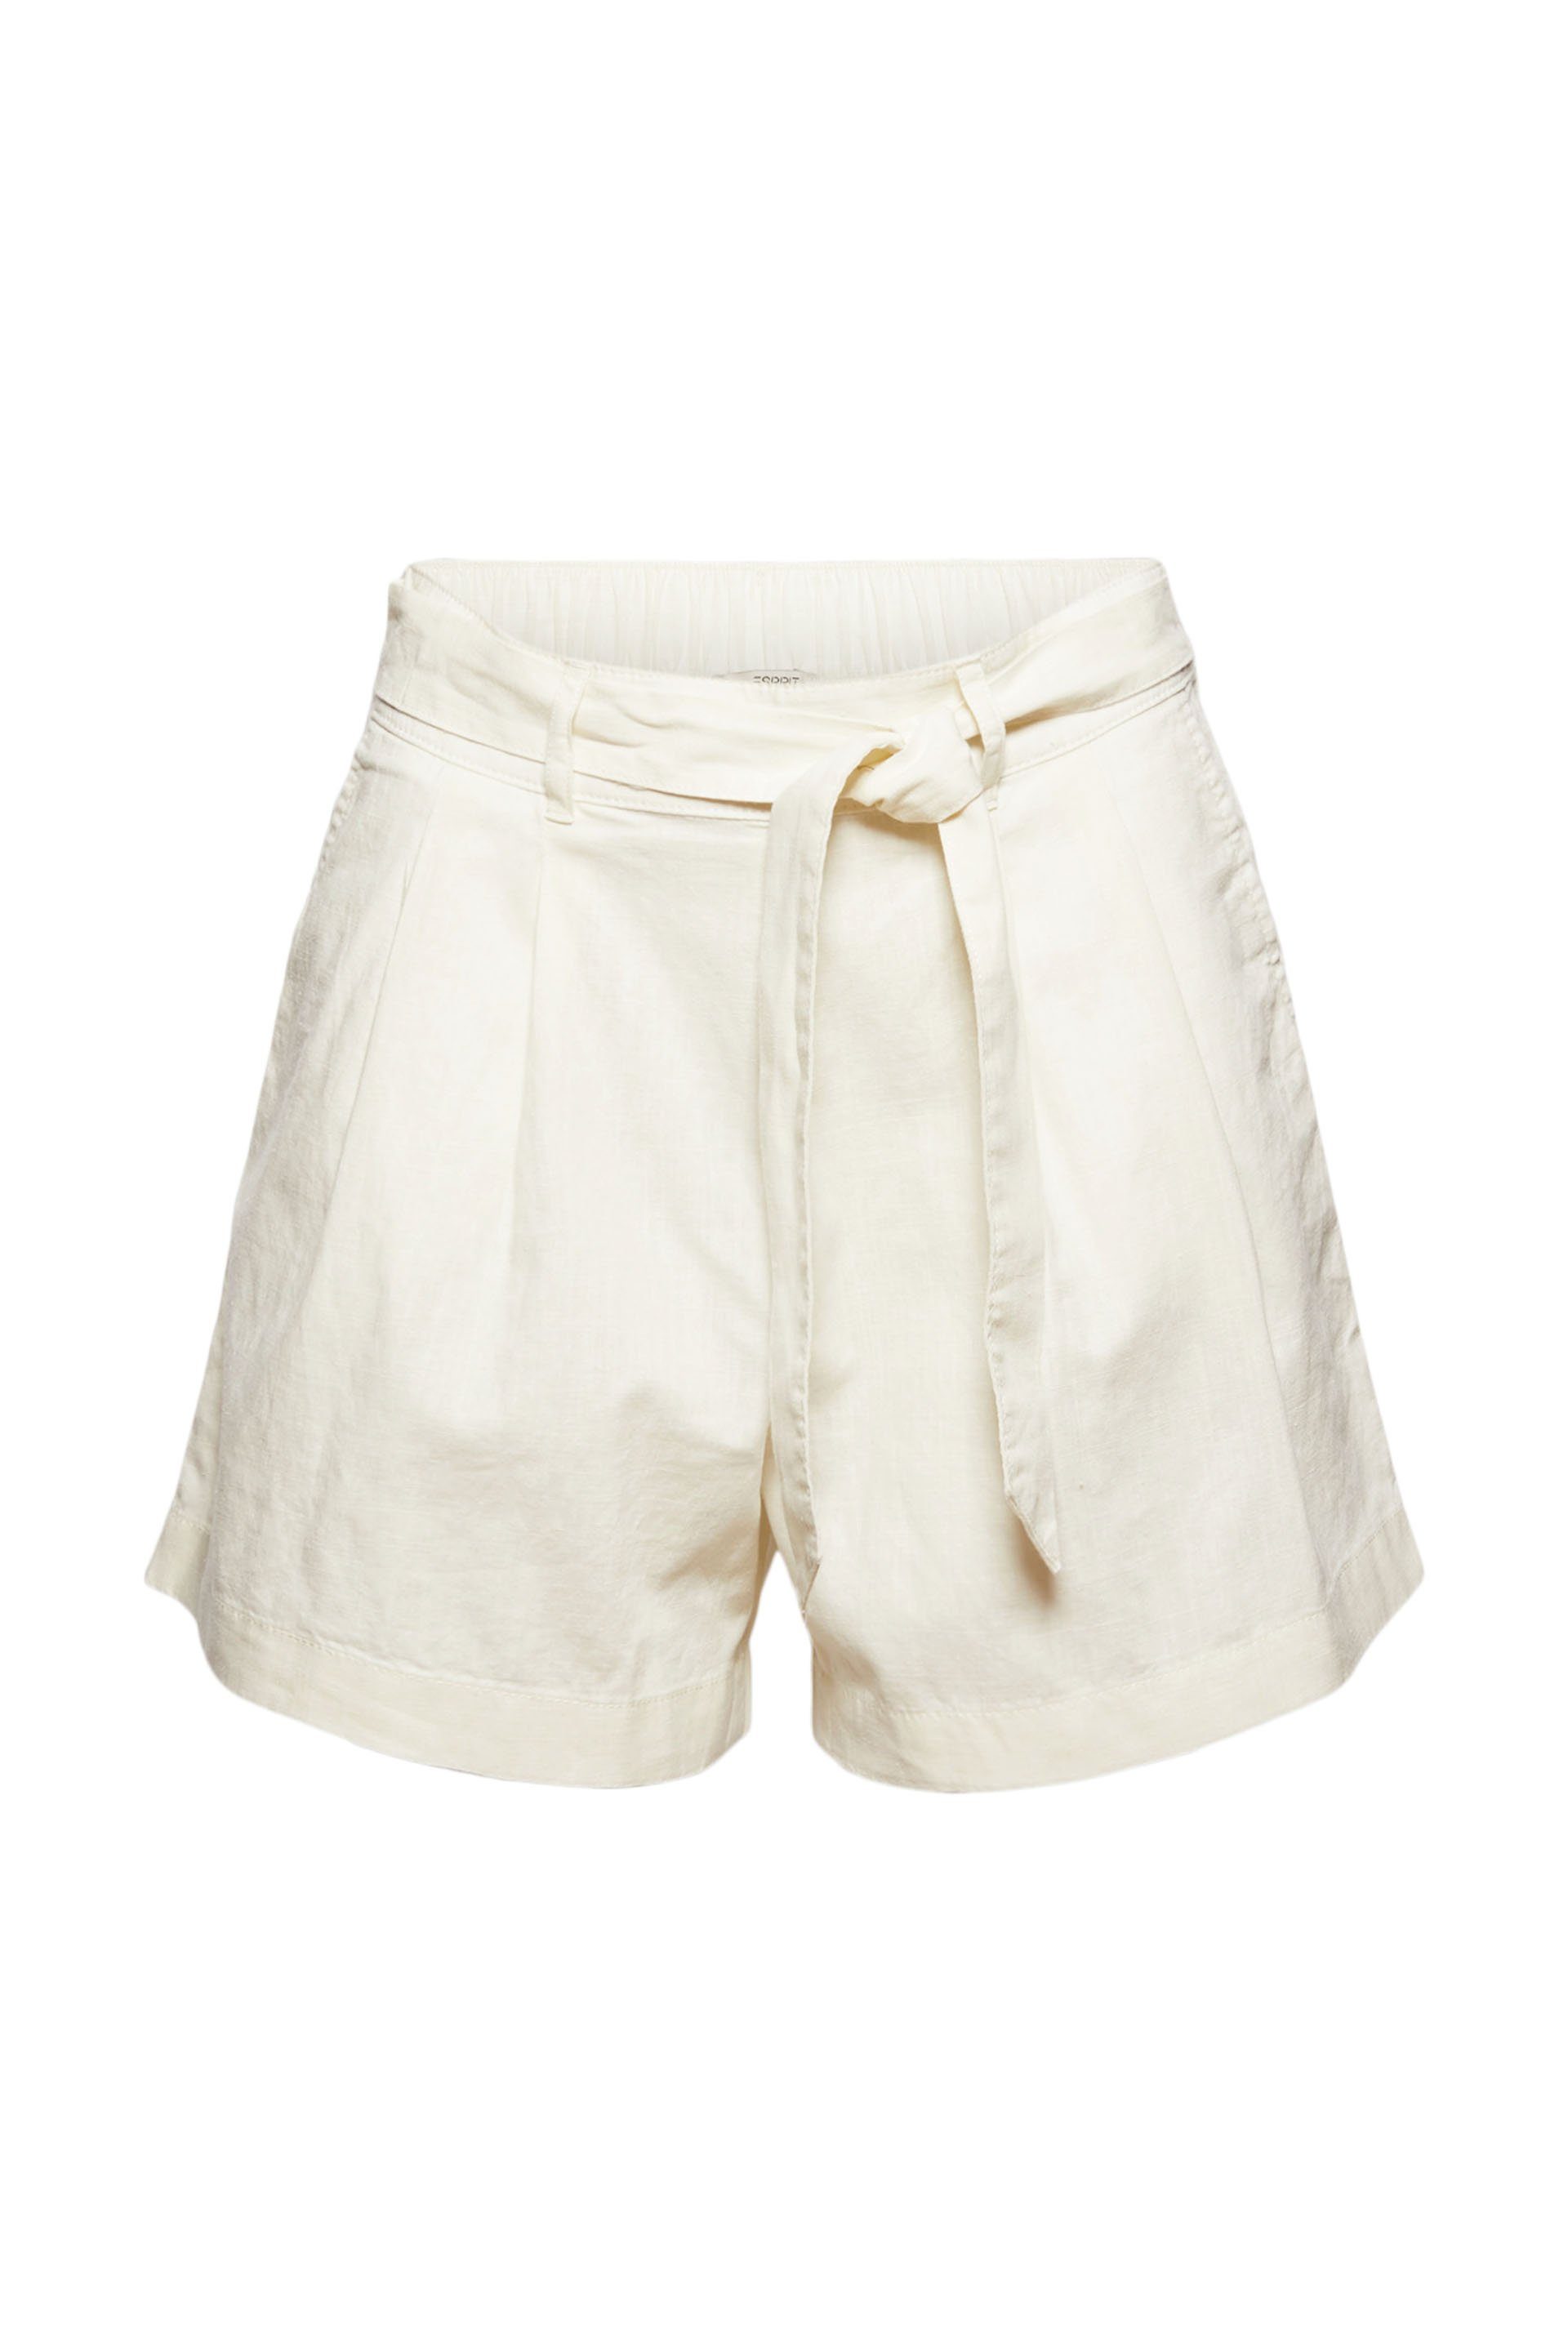 Esprit Collection Shorts off white | Shorts